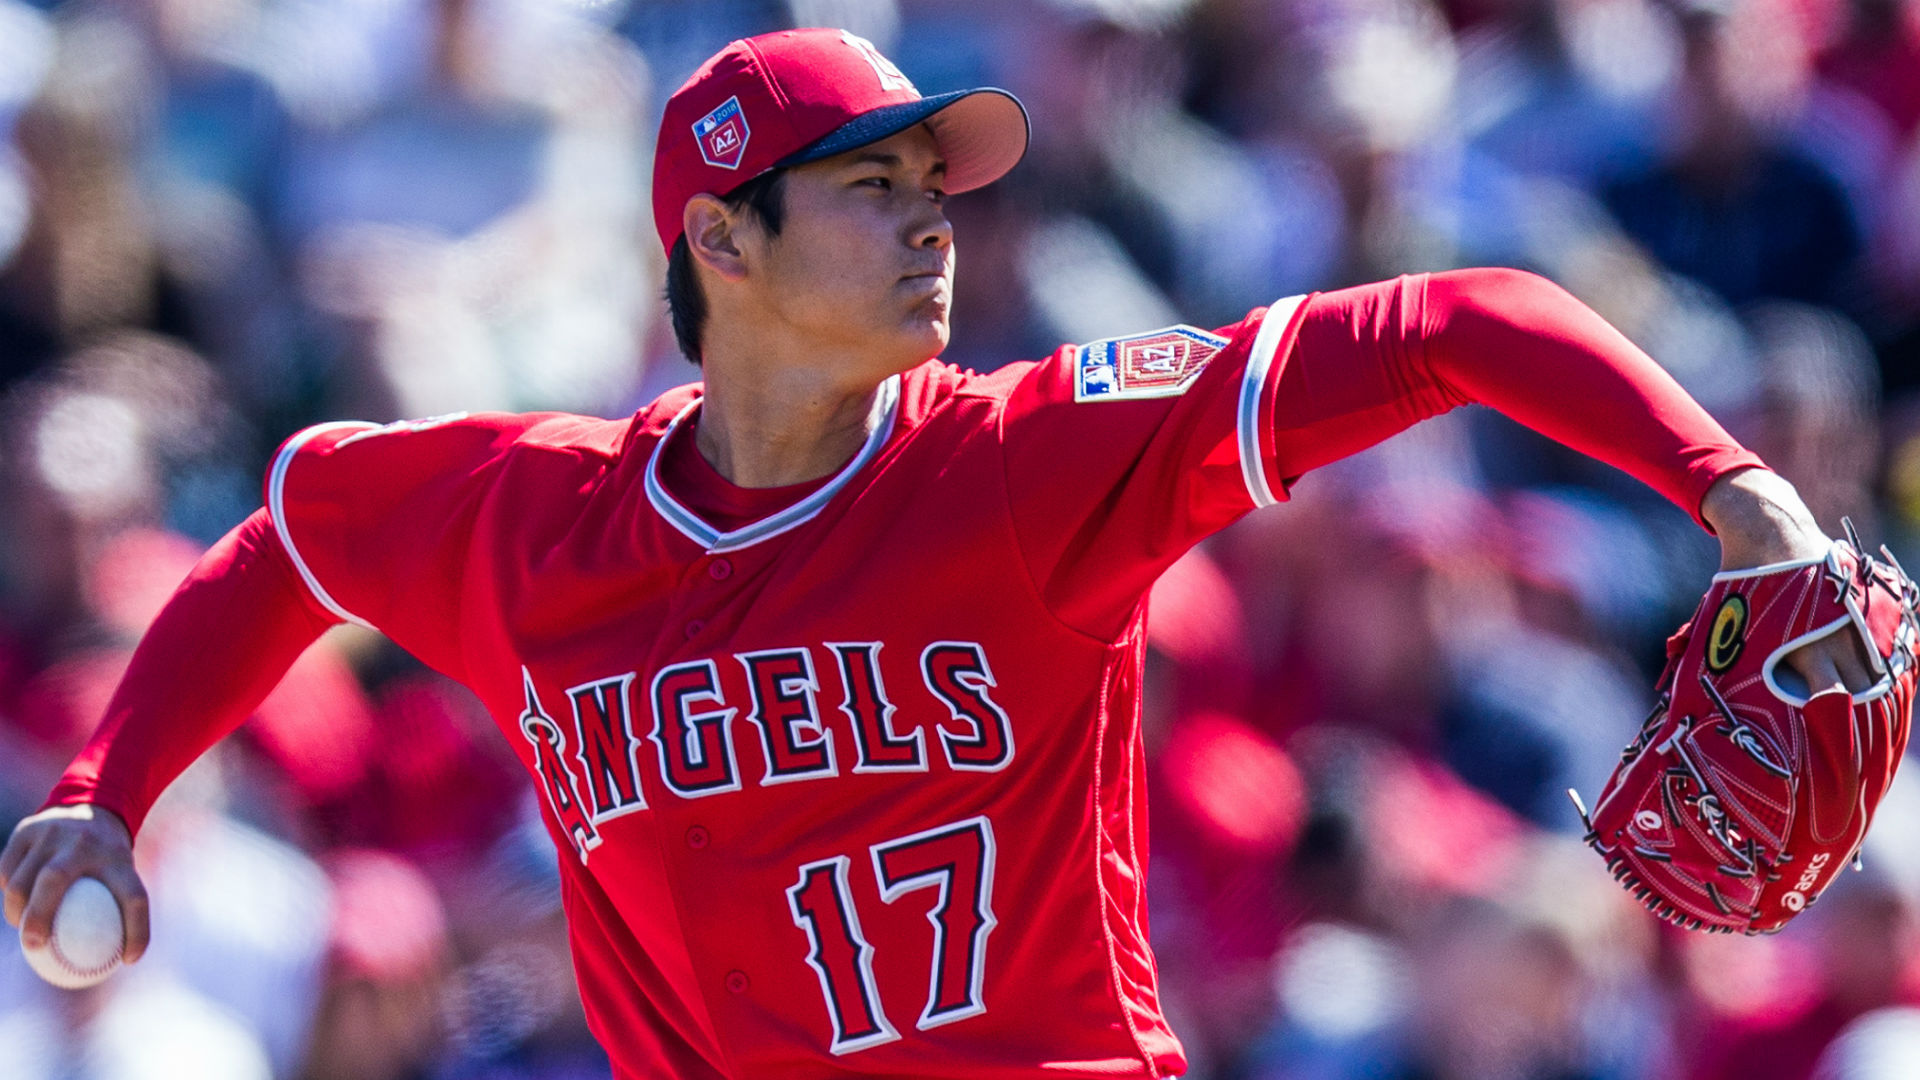 Ohtani shohei angels inning three vs gets runs six tijuana outing shelled mexican club game angeles los getty struck appearance